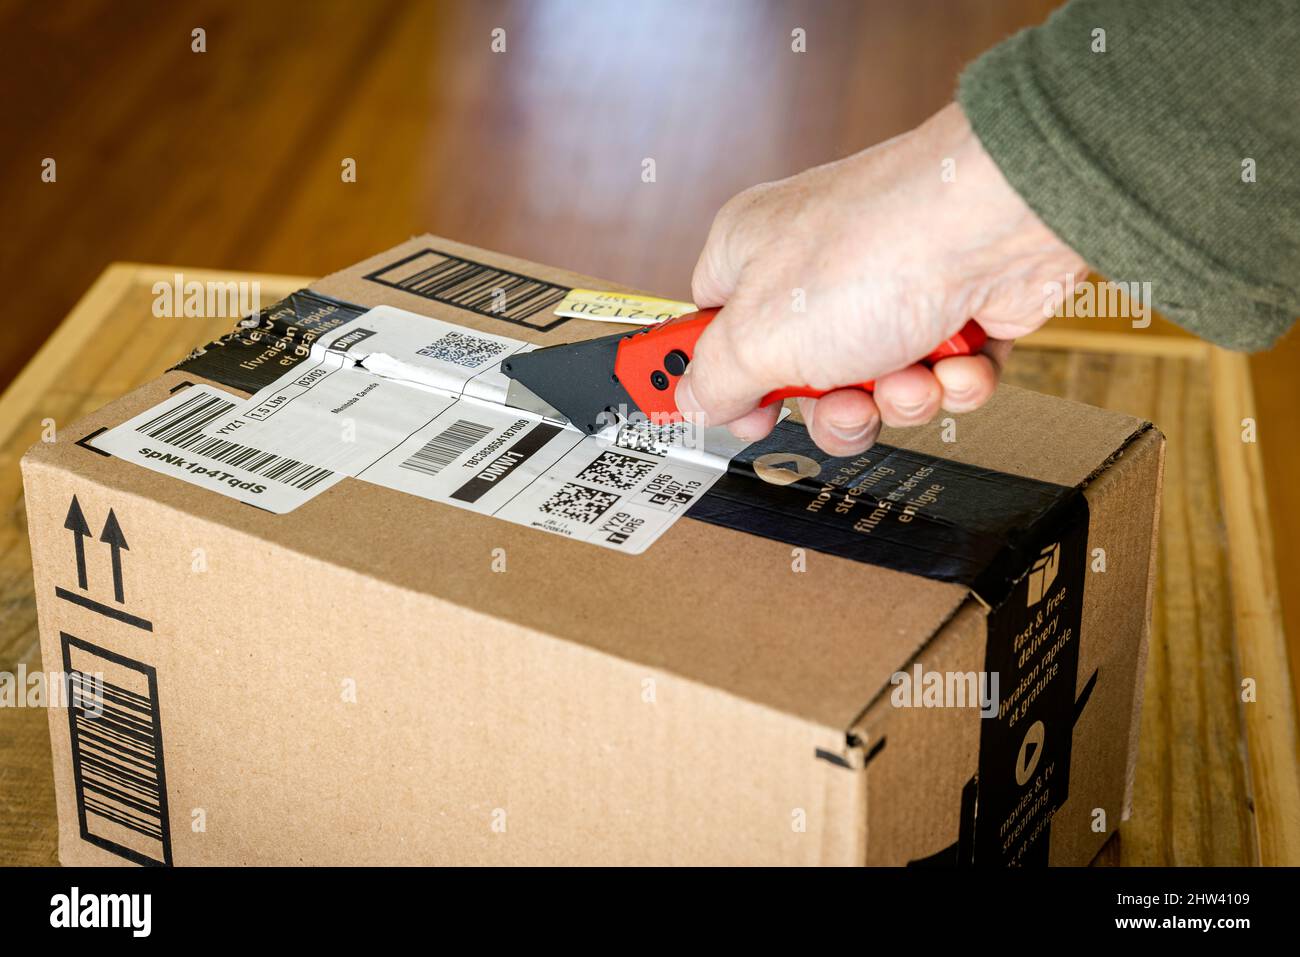 Opening a cardboard box with a utility knife. Stock Photo